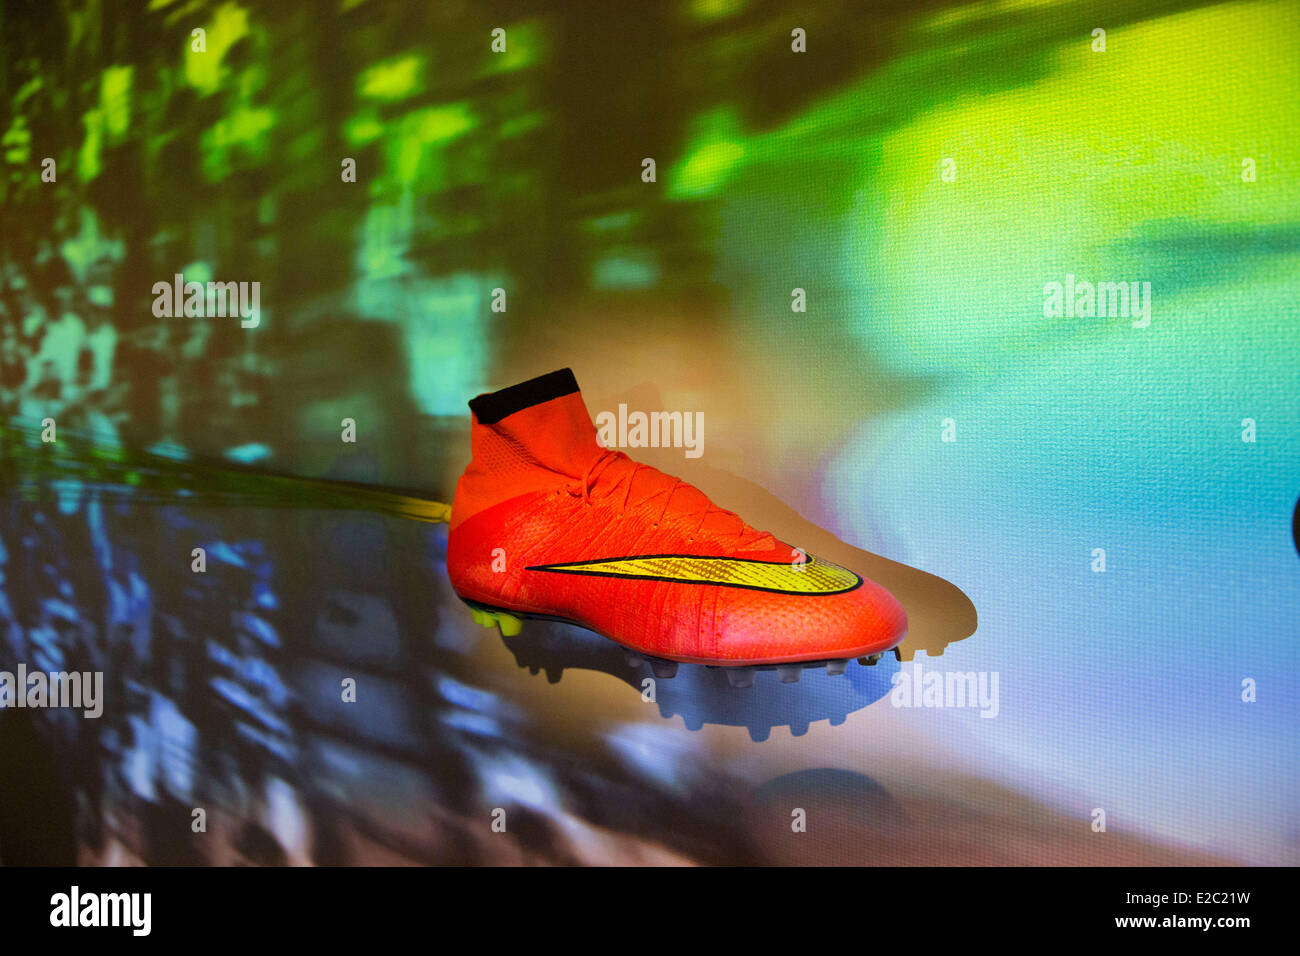 New York, NY, US. 18th June, 2014. Nike it's new World Cup soccer boot at it's flagship store in midtown The new Nike 2014 World Cup boots herald new